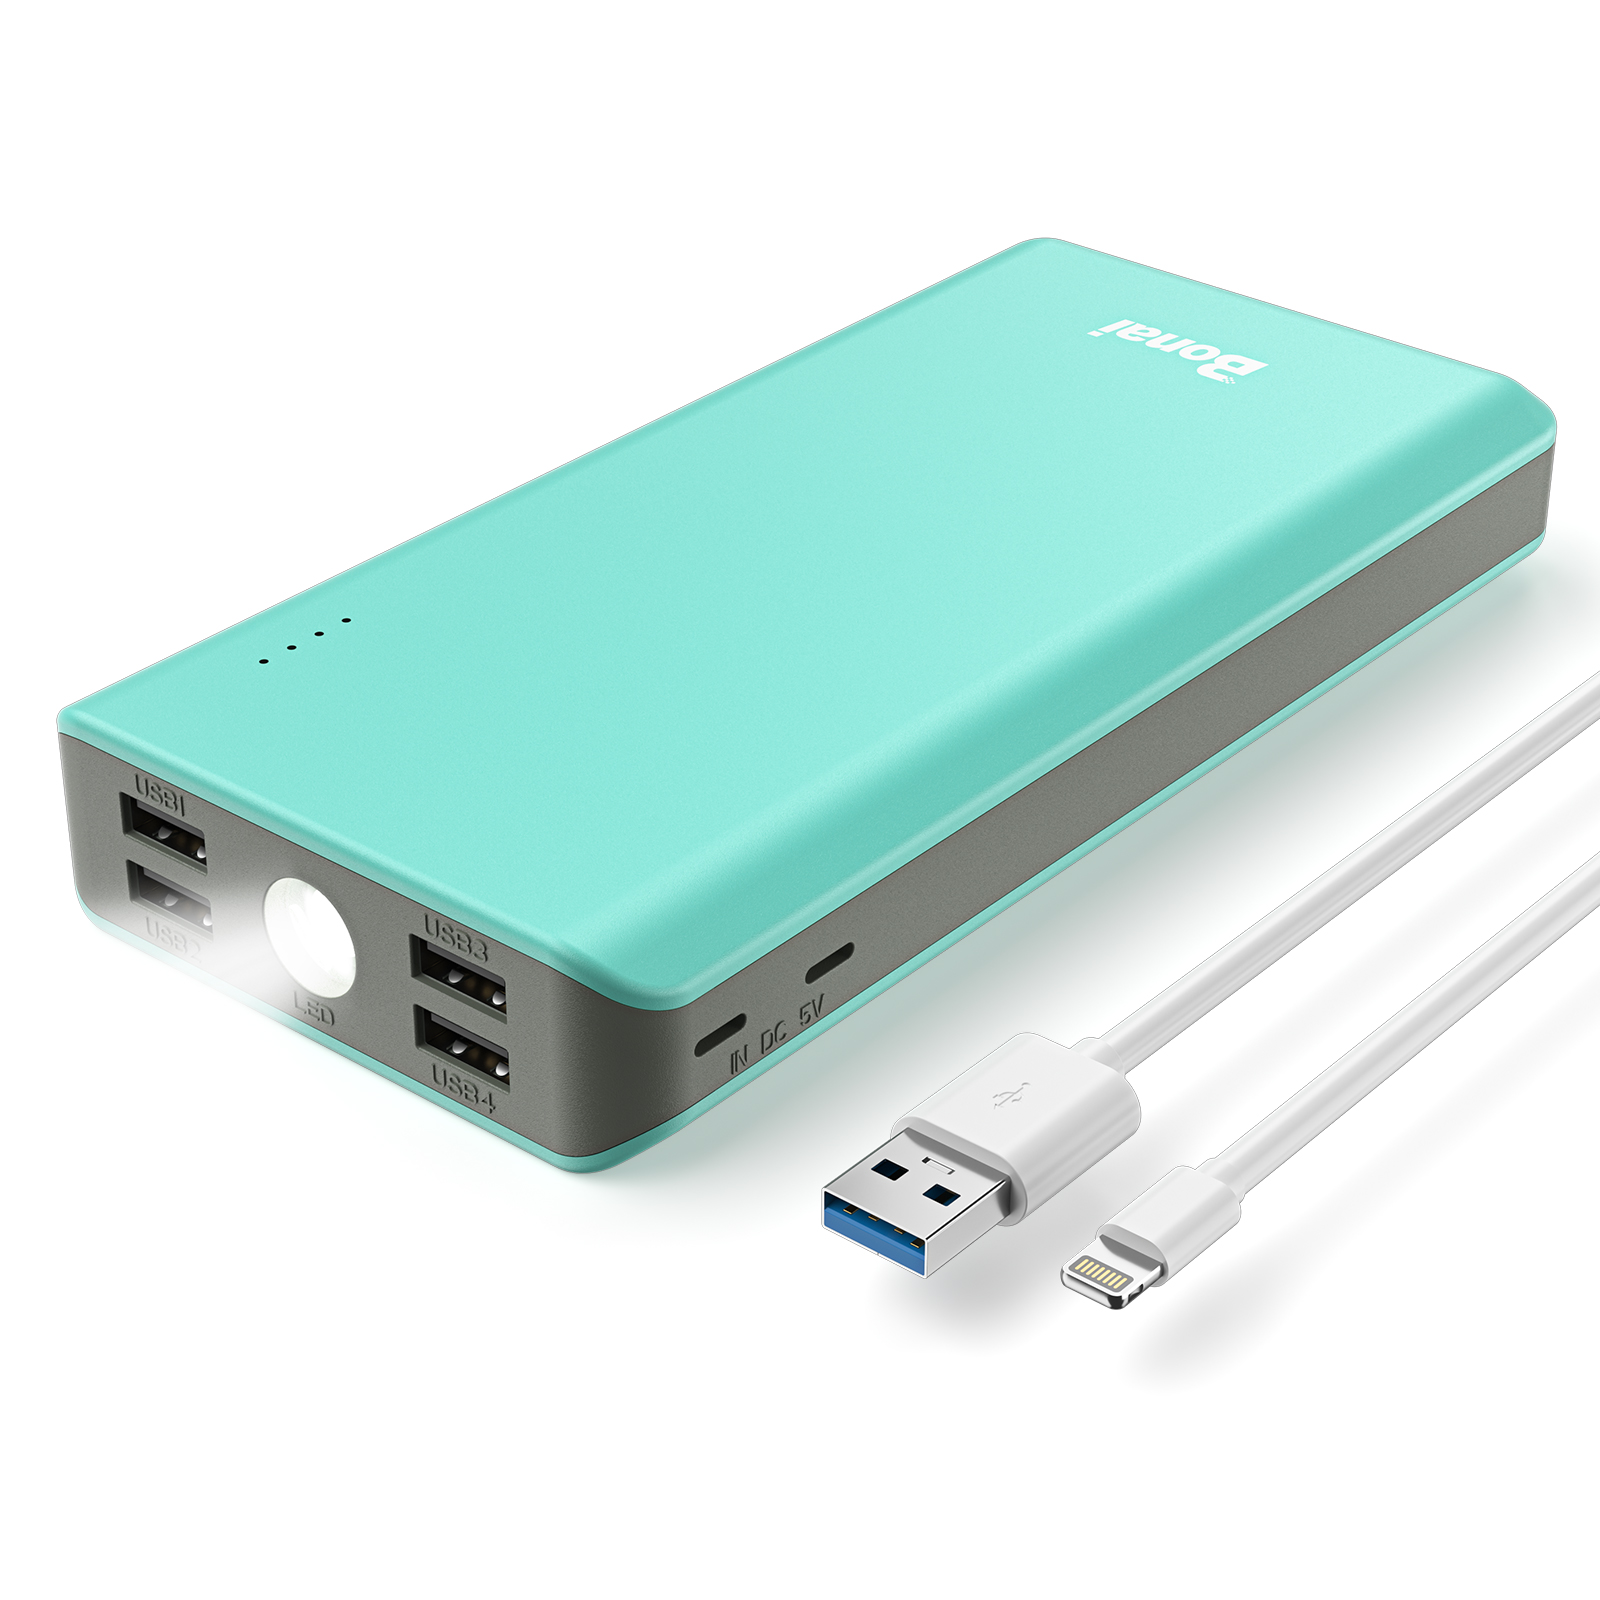 BONAI Portable Charger 30000mAh, High Capacity Power Bank and External Battery Pack Fast 4A Input 2.8A Output with Flashlight for iPhone 13 12 iPad Samsung Galaxy Road Trip Charging - Mint